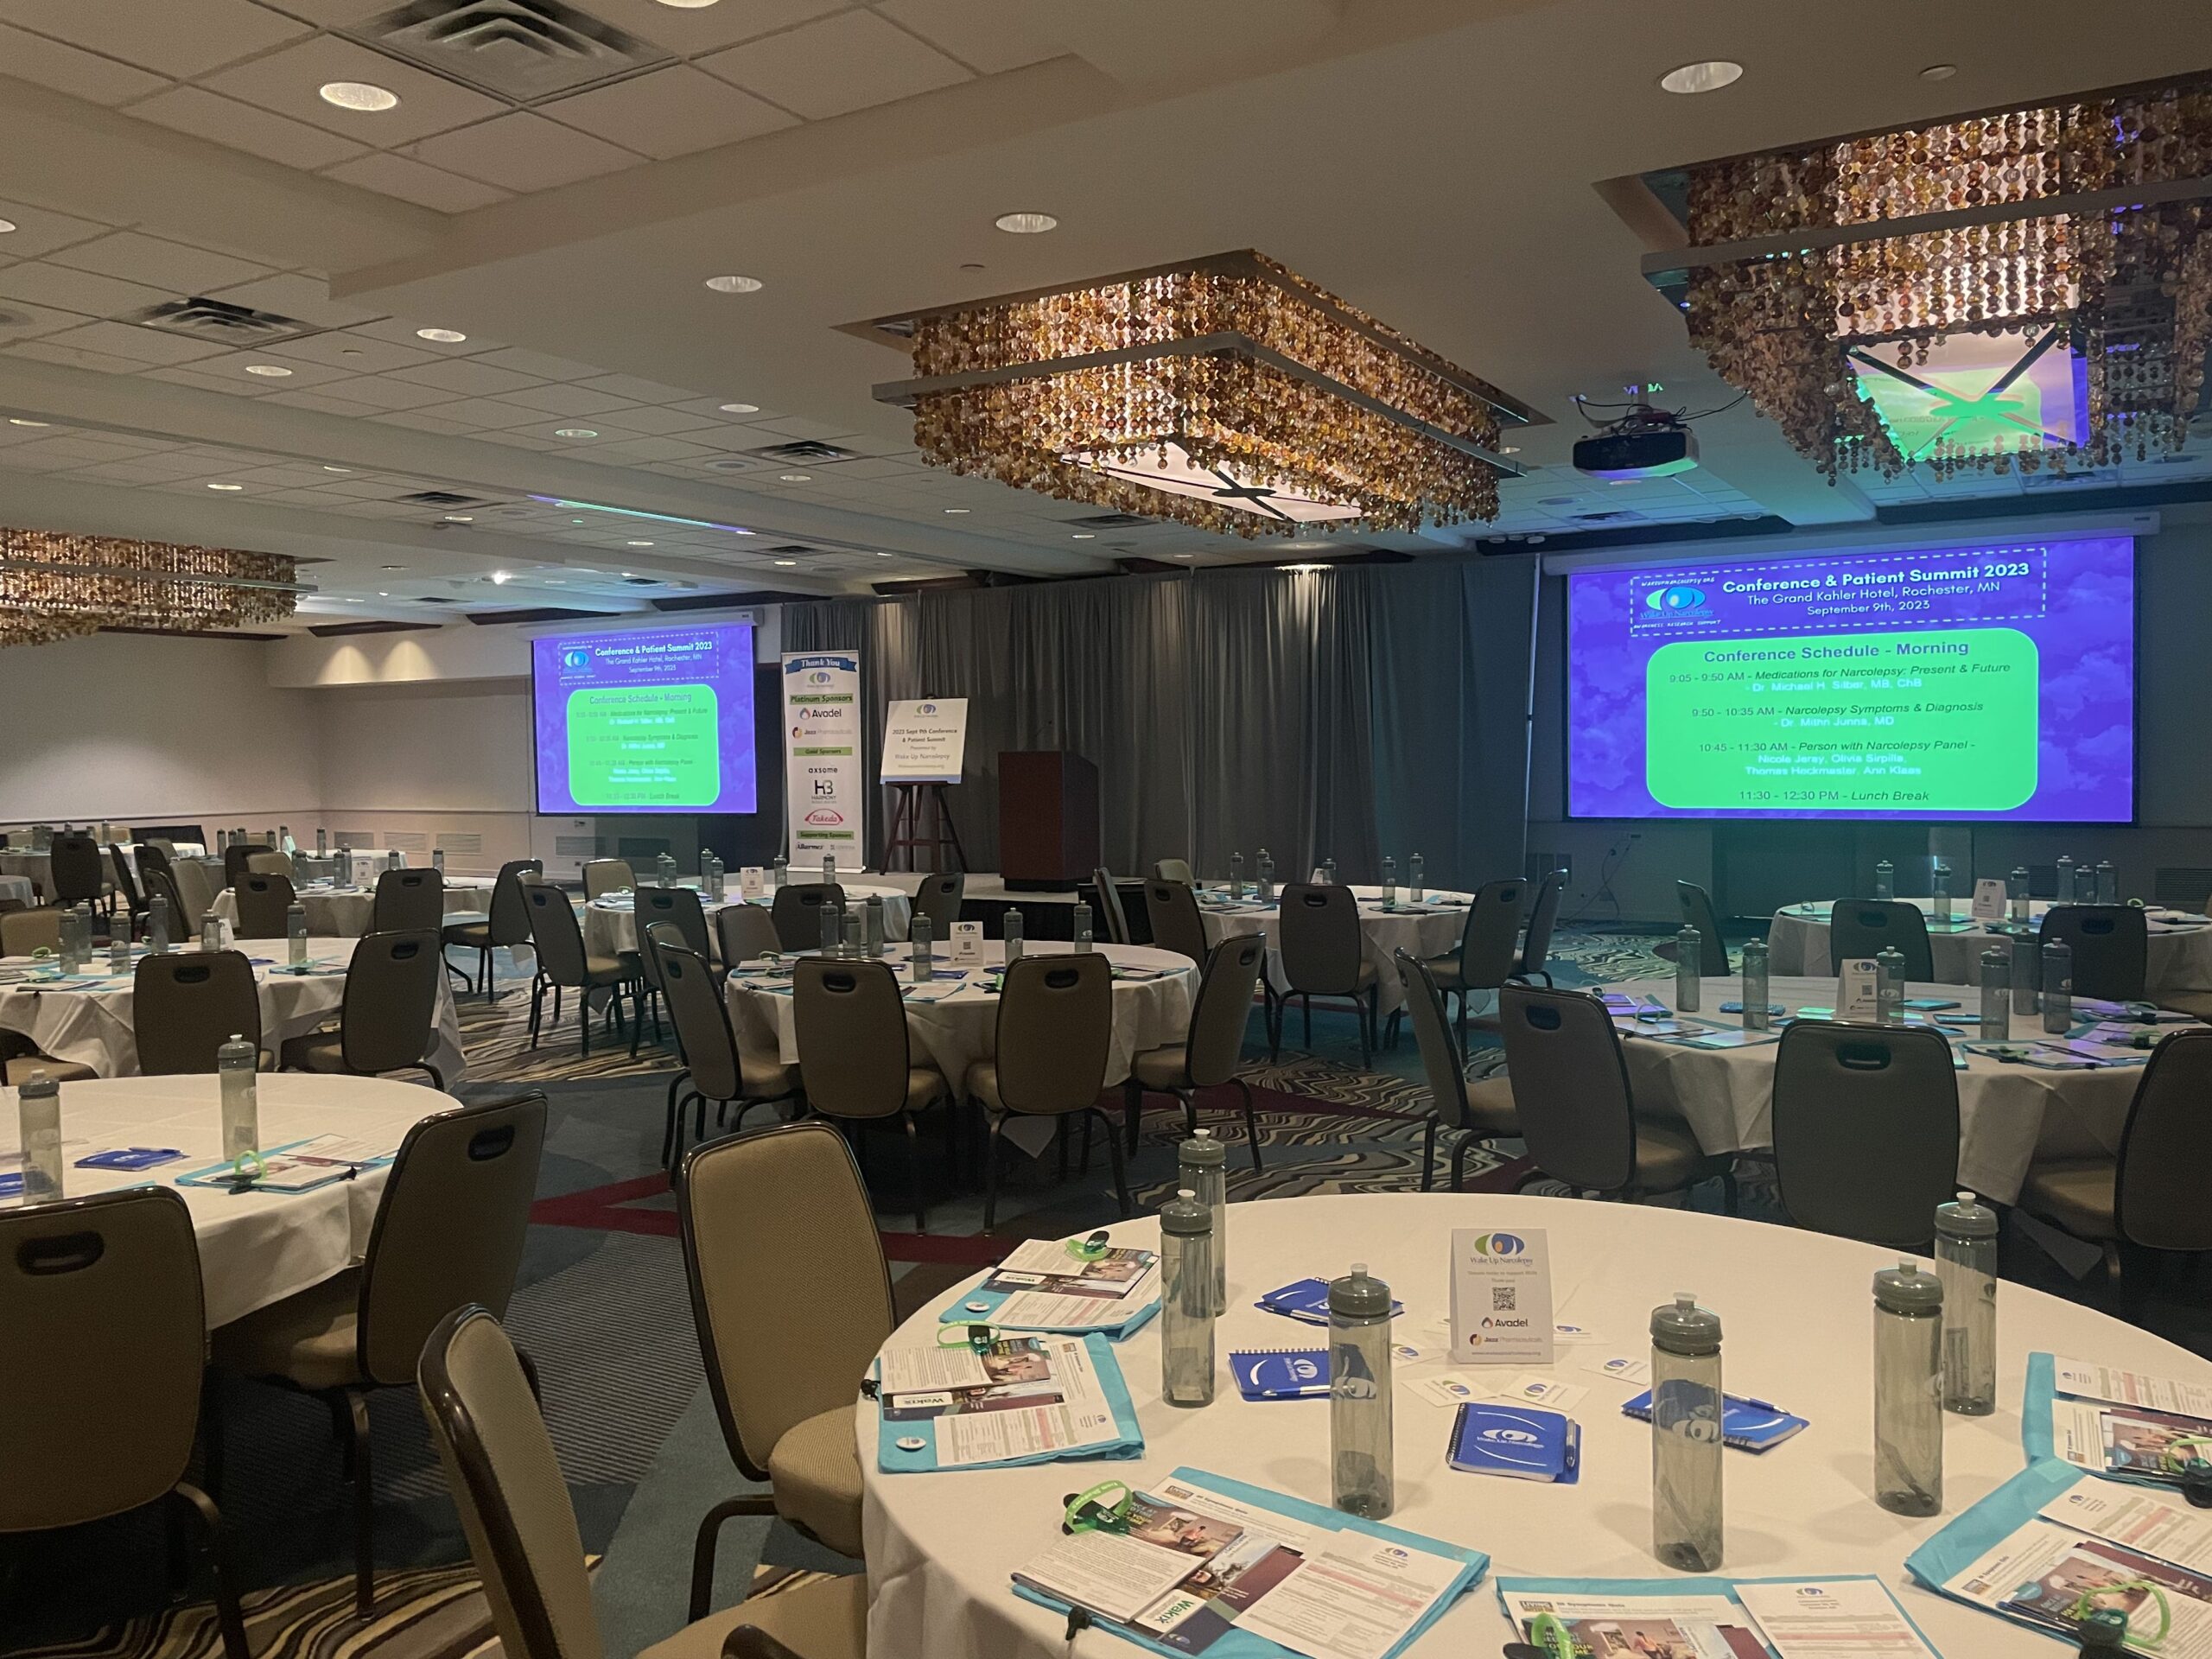 Overview of setup at 2023 Wake Up Narcolepsy National Conference & Patient Summit in Rochester, Minnesota